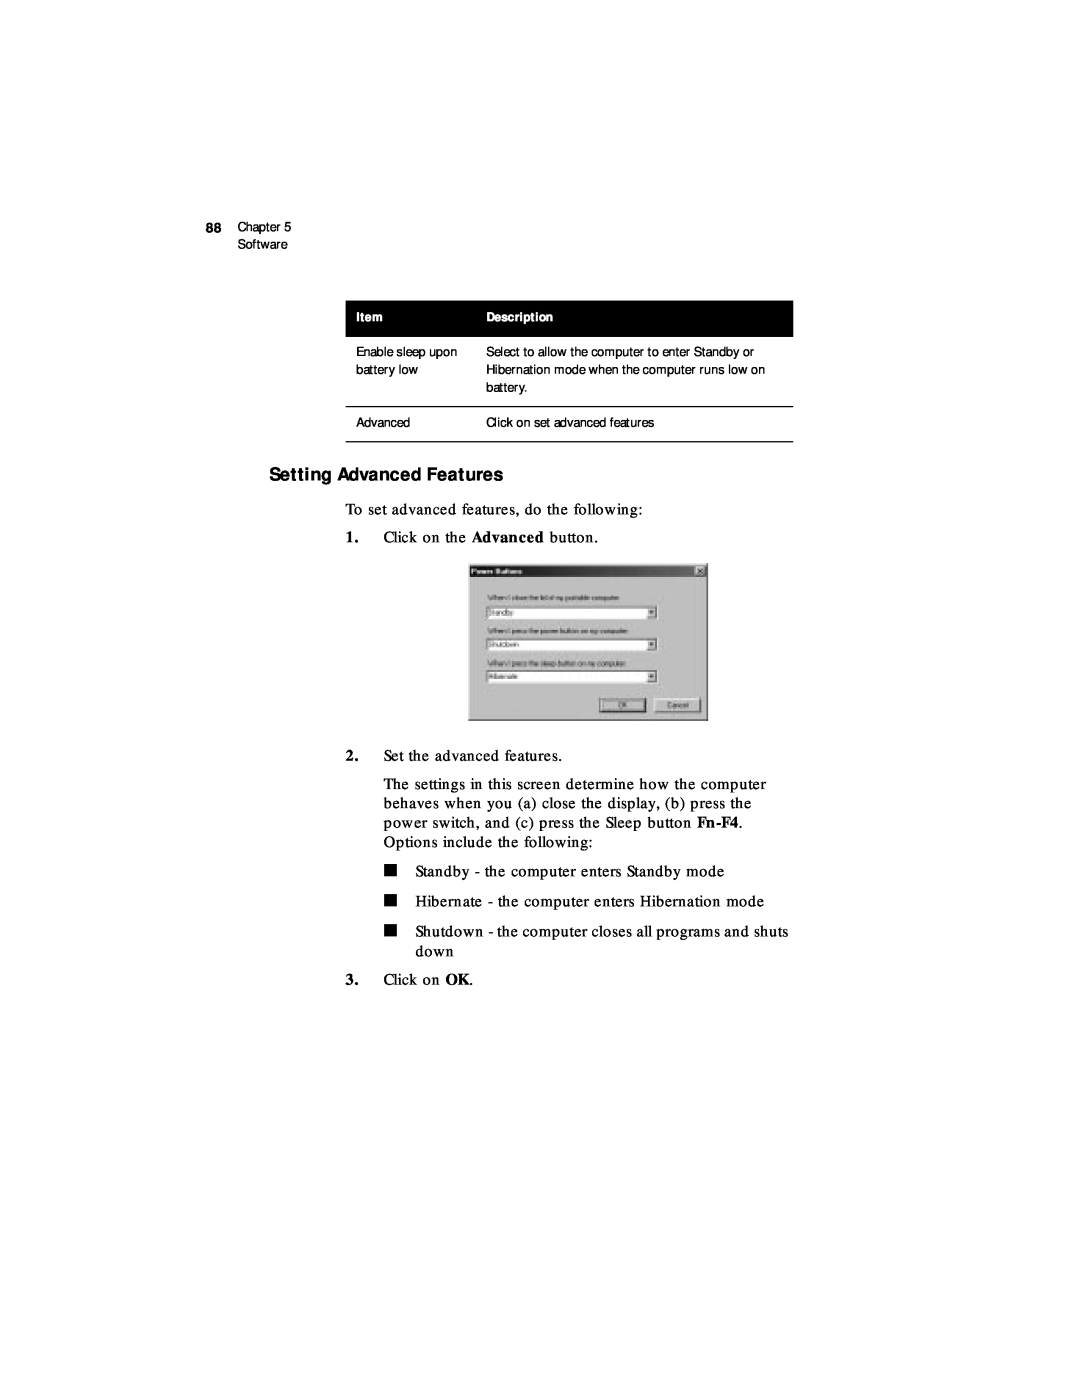 Acer 330 Series manual Setting Advanced Features 